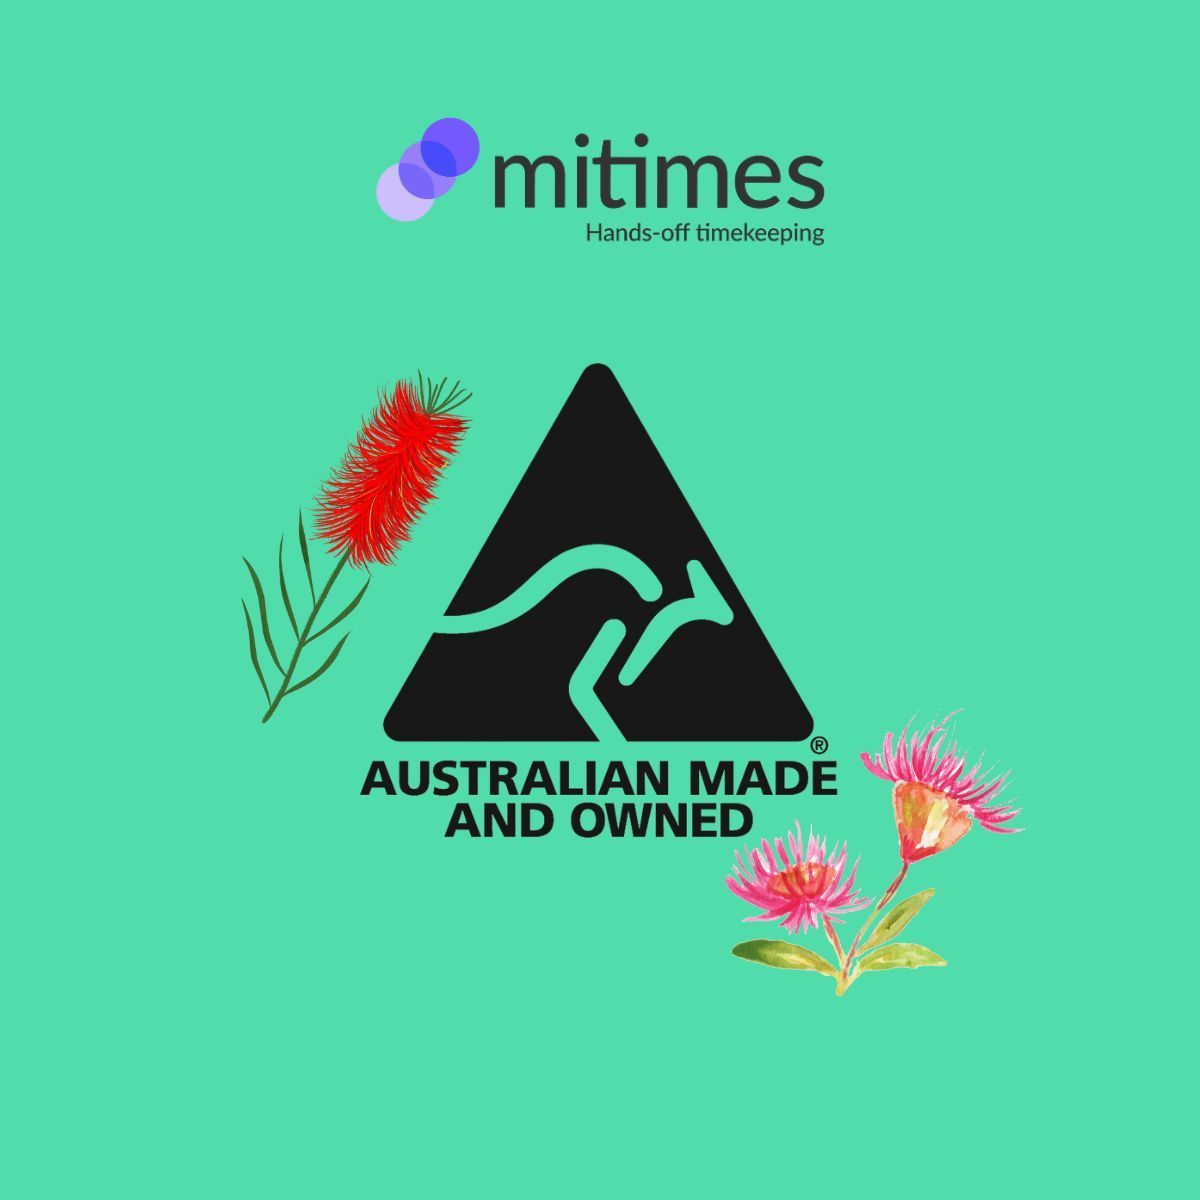 We're a global AUST aade software company using tech to solve the inaccurate & incomplete capture of data. For lawyers, the tool has been proven to increase billable time from 30min per day up to doubling fee earners mthly billable time #mitimes  #australianmade @AustralianMade